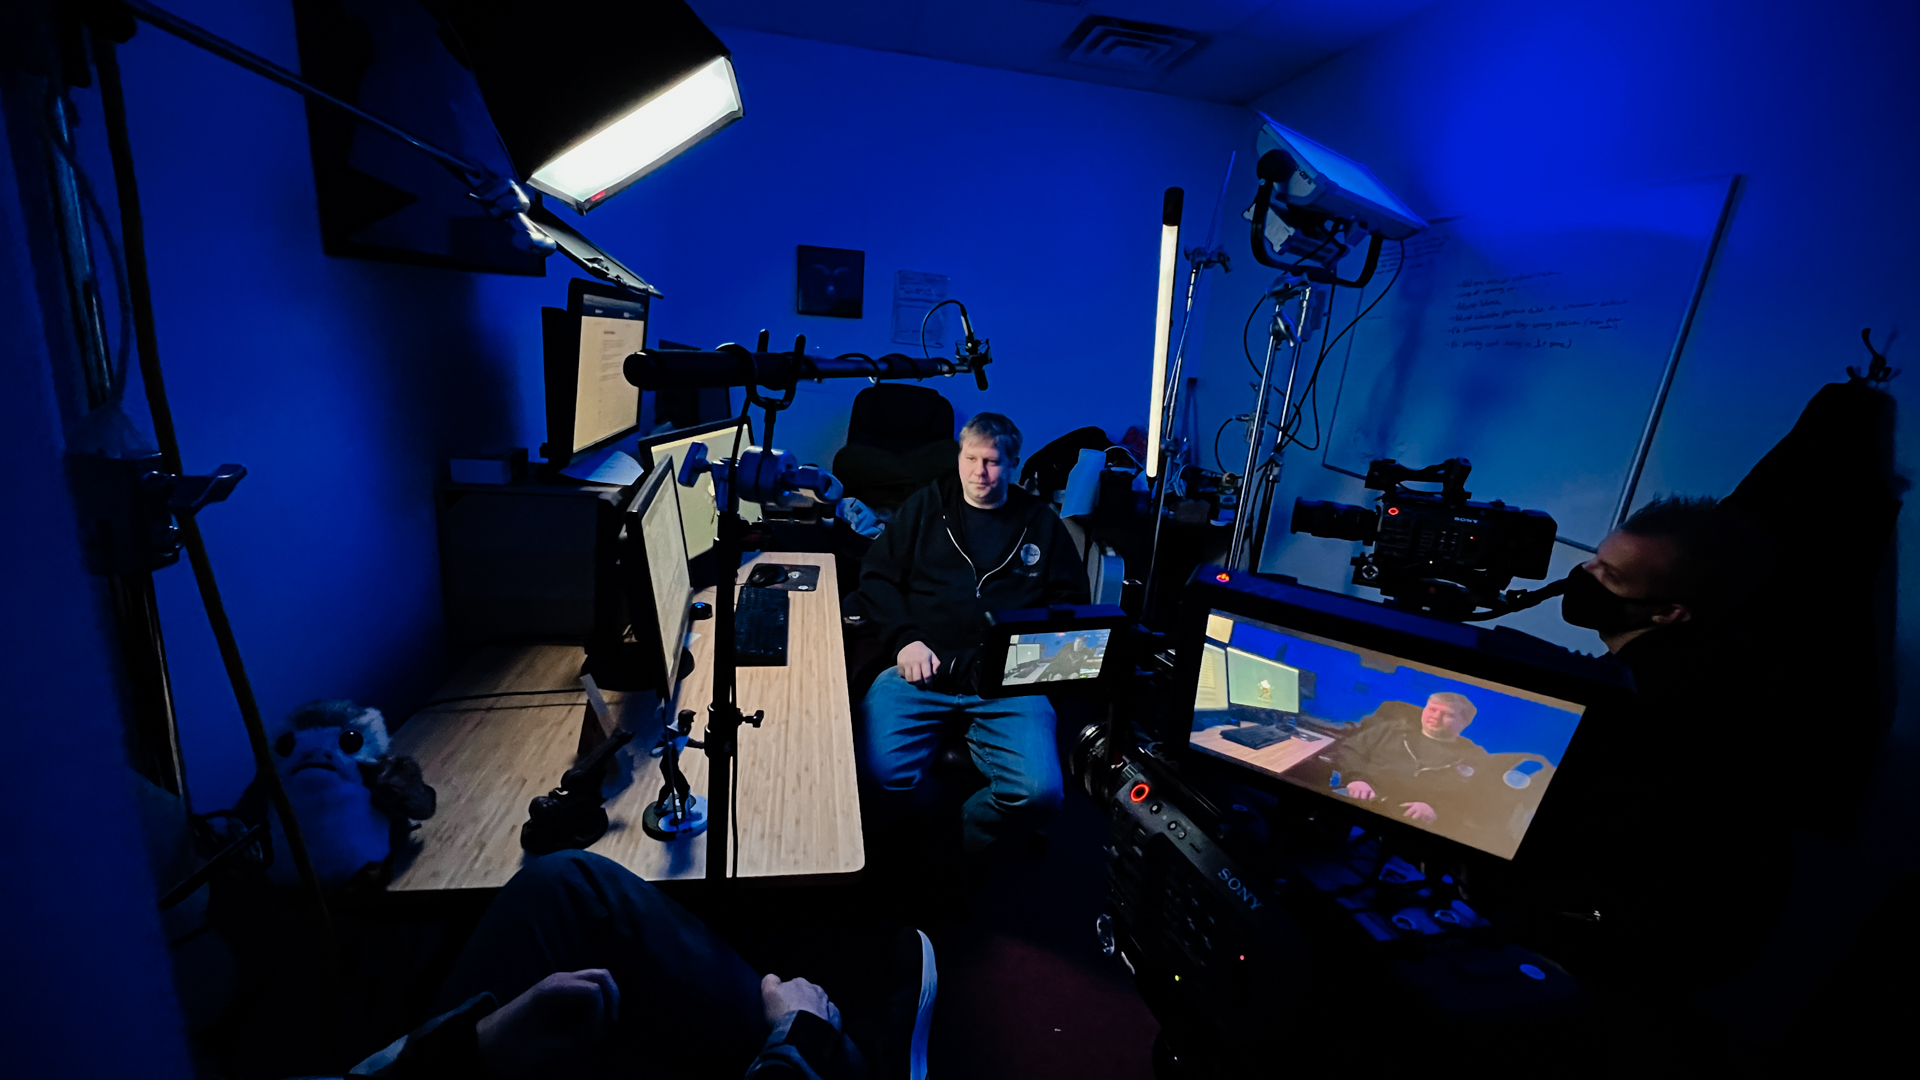 behind the scenes documentary crew shoots man in blue light